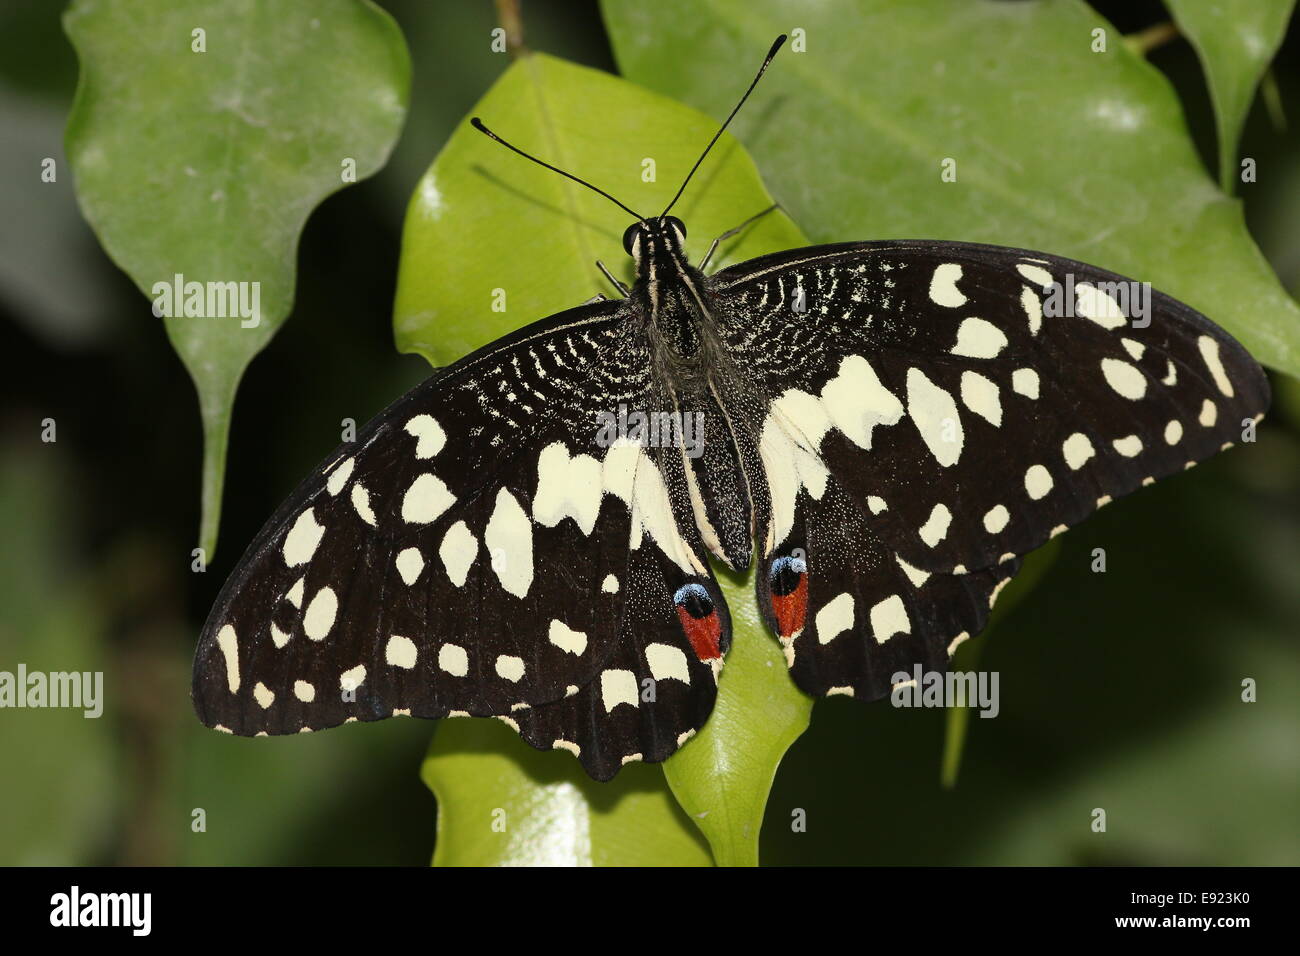 Chequered Swallowtail (Papilio demoleus) a.k.a. Lemon or Lime Swallowtail or Small Citrus Butterfly, posing on a leaf Stock Photo